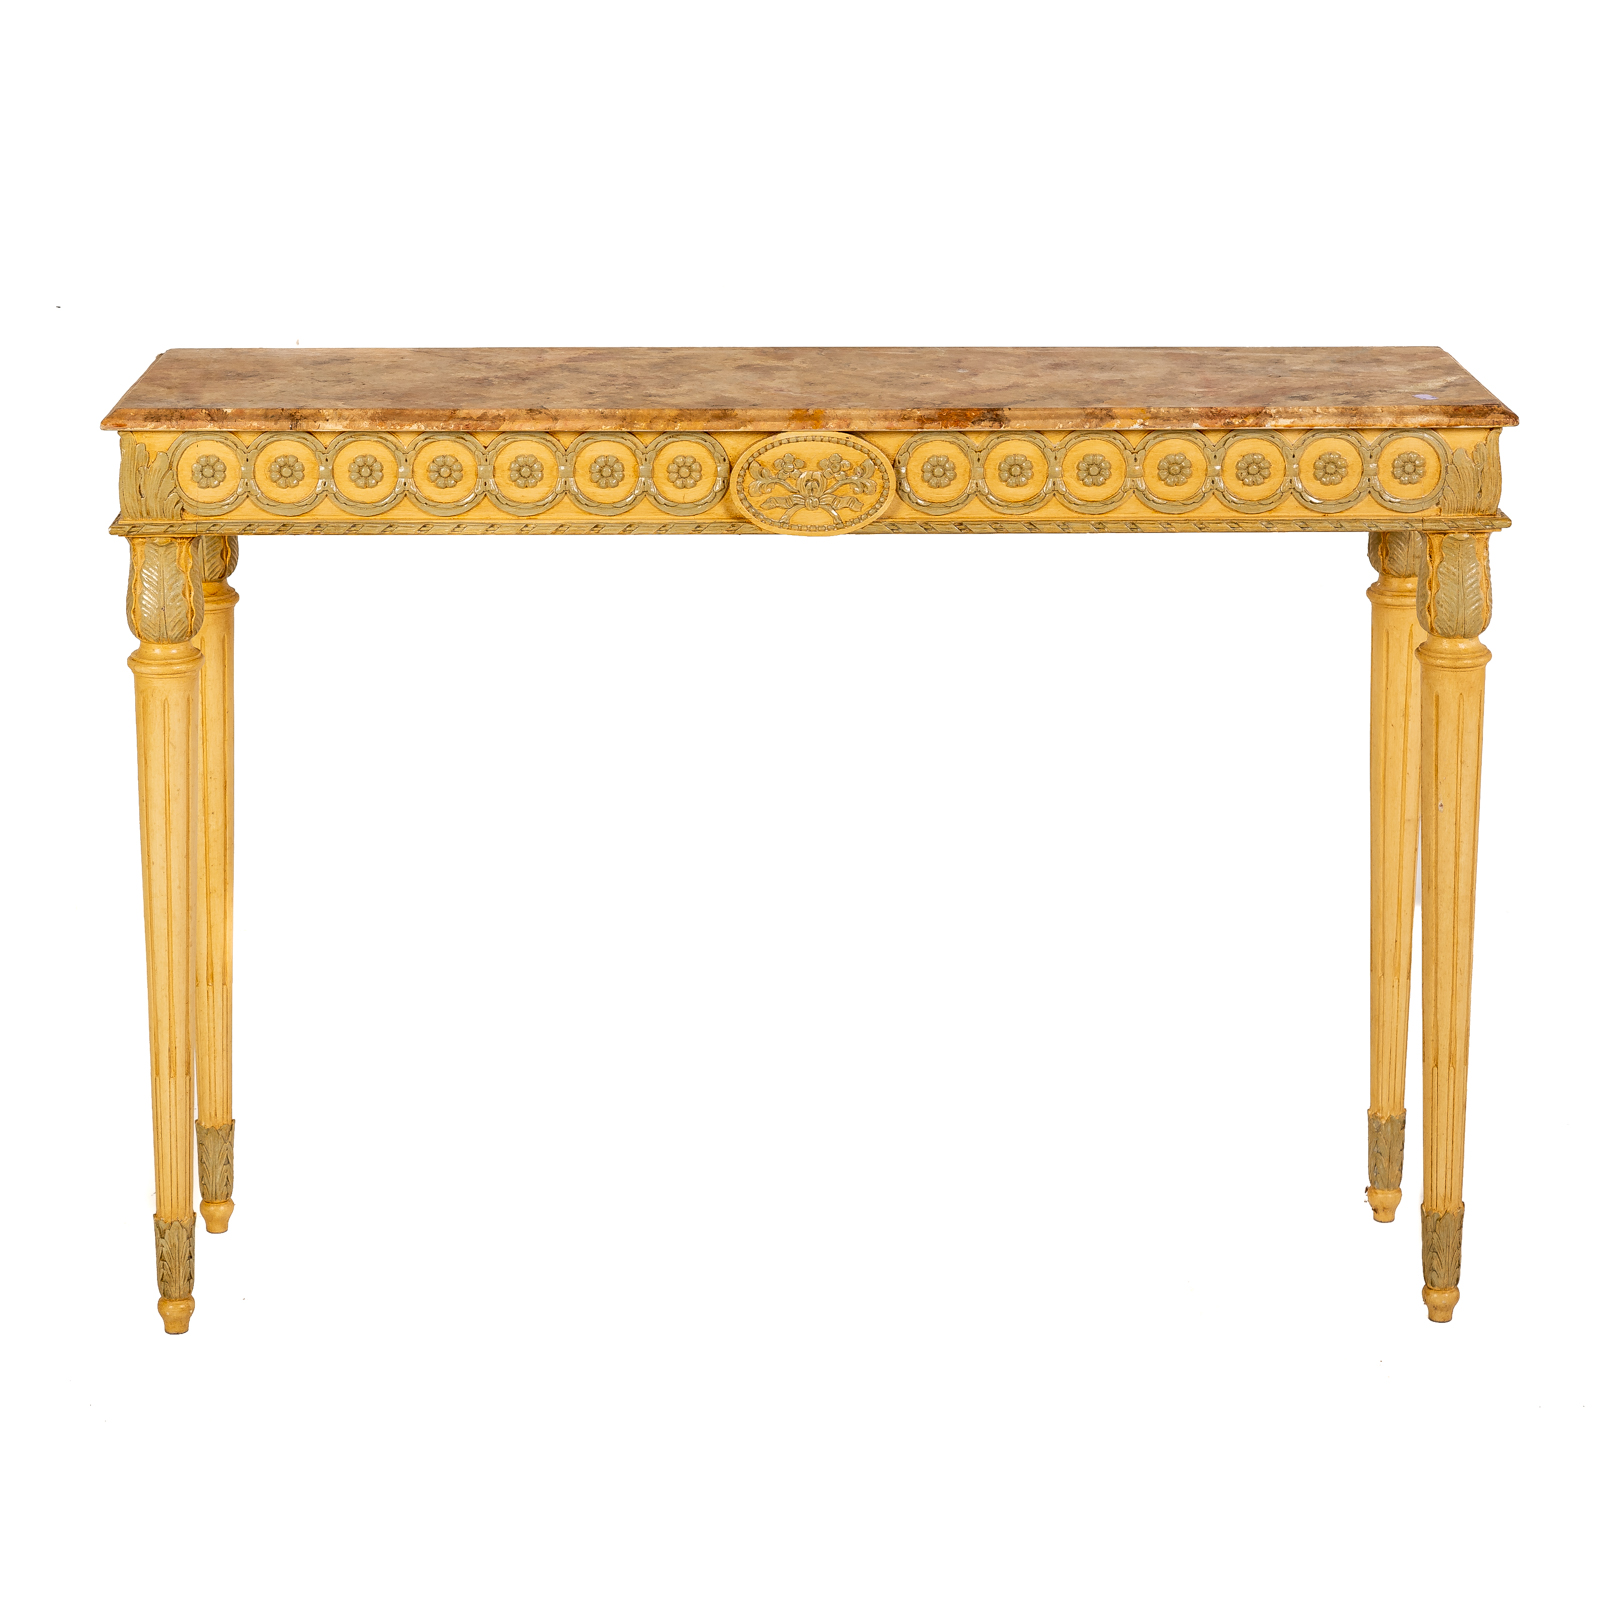 LOUIS XVI STYLE PAINTED WOOD CONSOLE 29ddc9